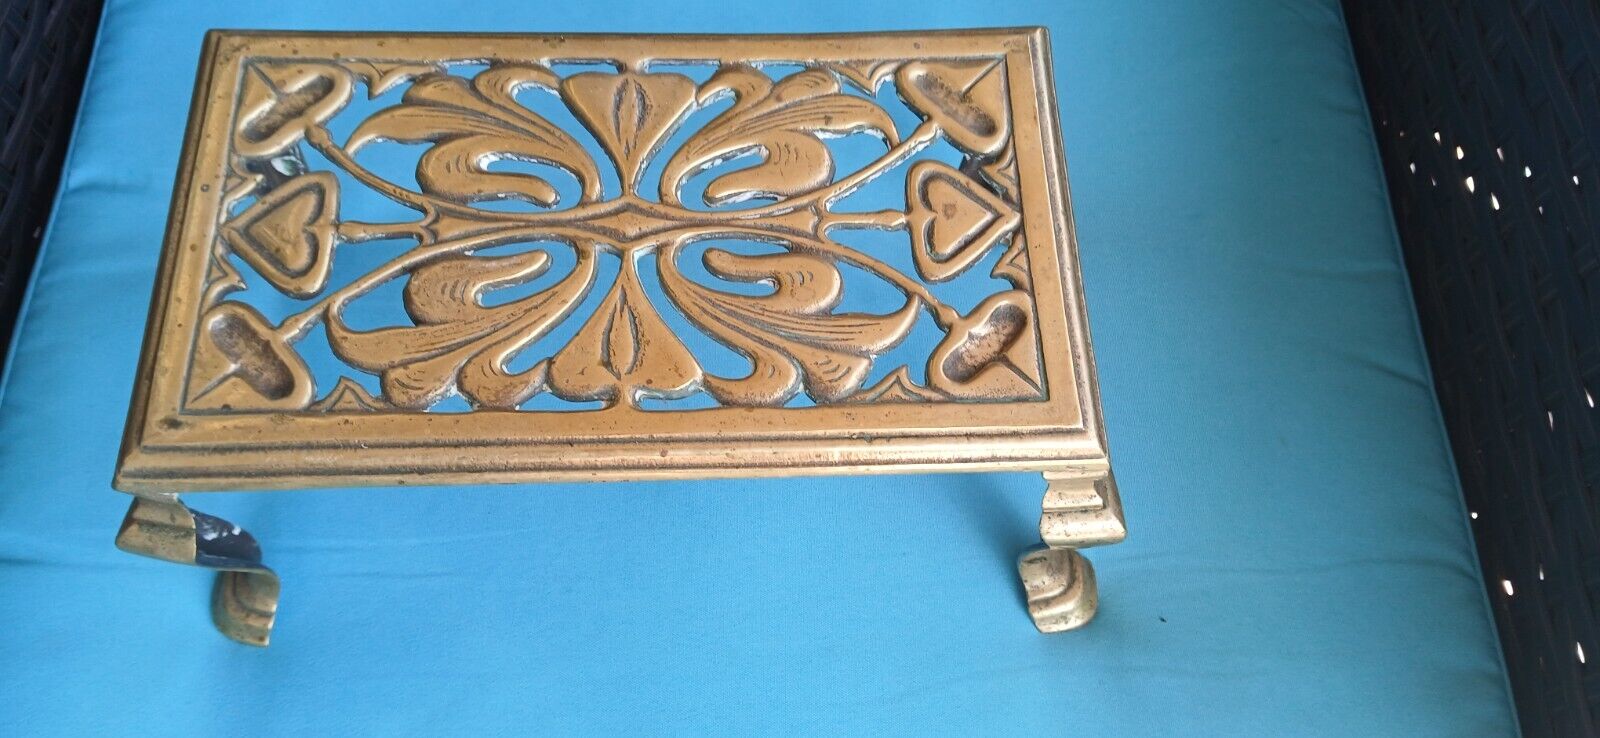 antique footed brass trivet stand 5 x 9 inches 4 inch legs